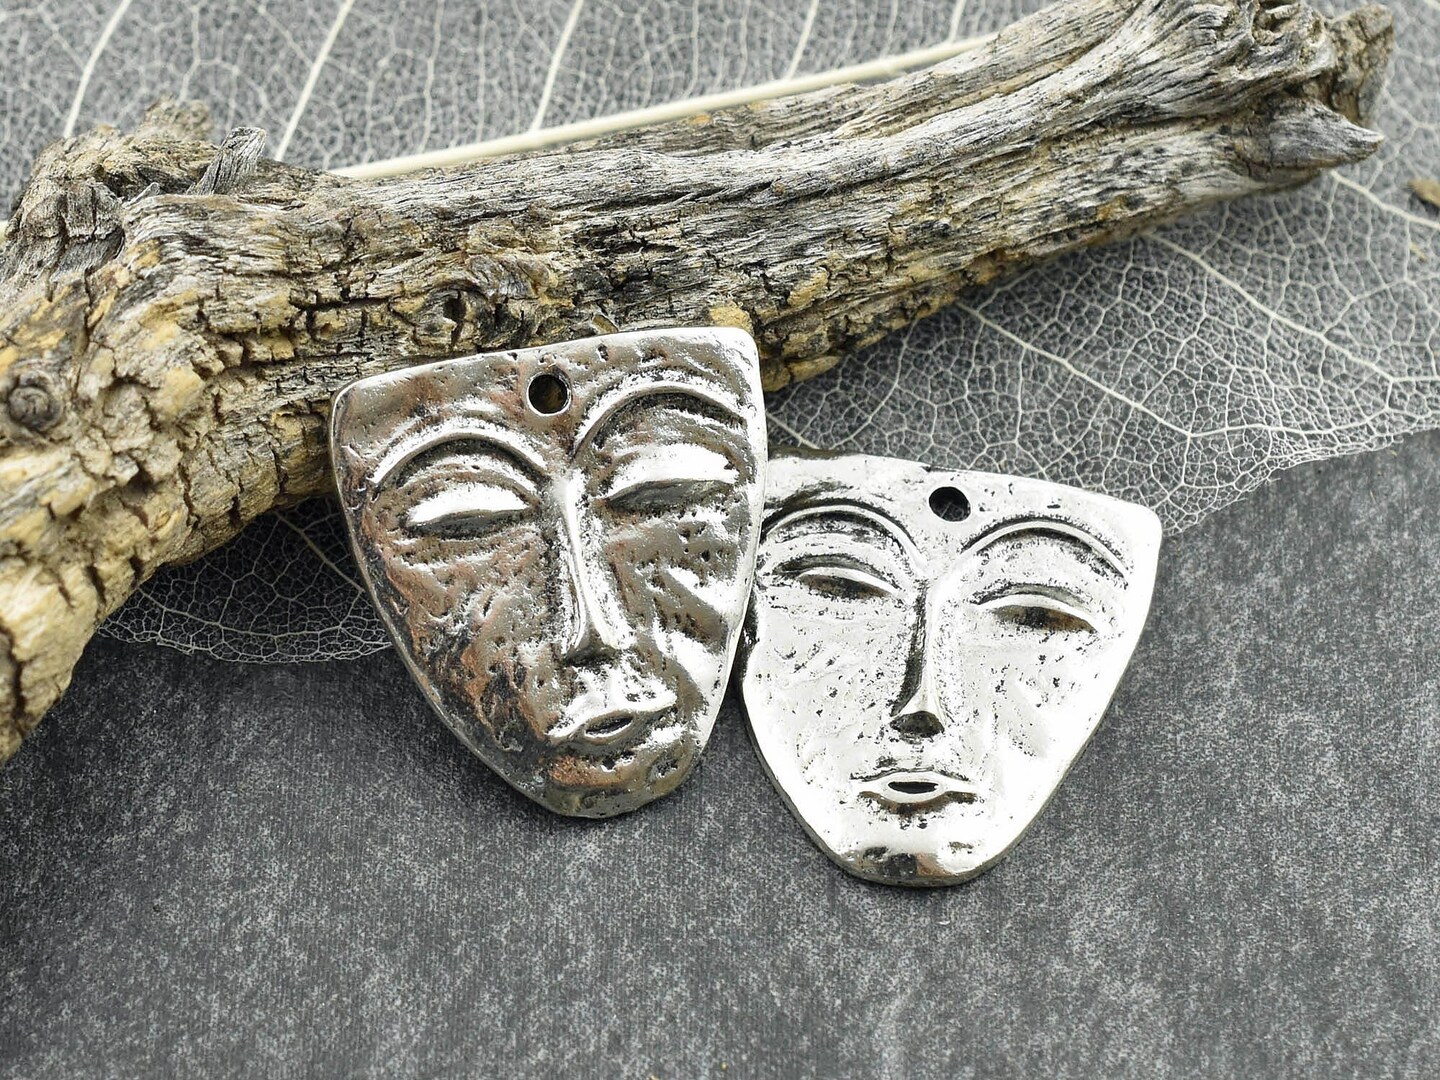 *10* 25x24mm Antique Silver Maya Mask Charms